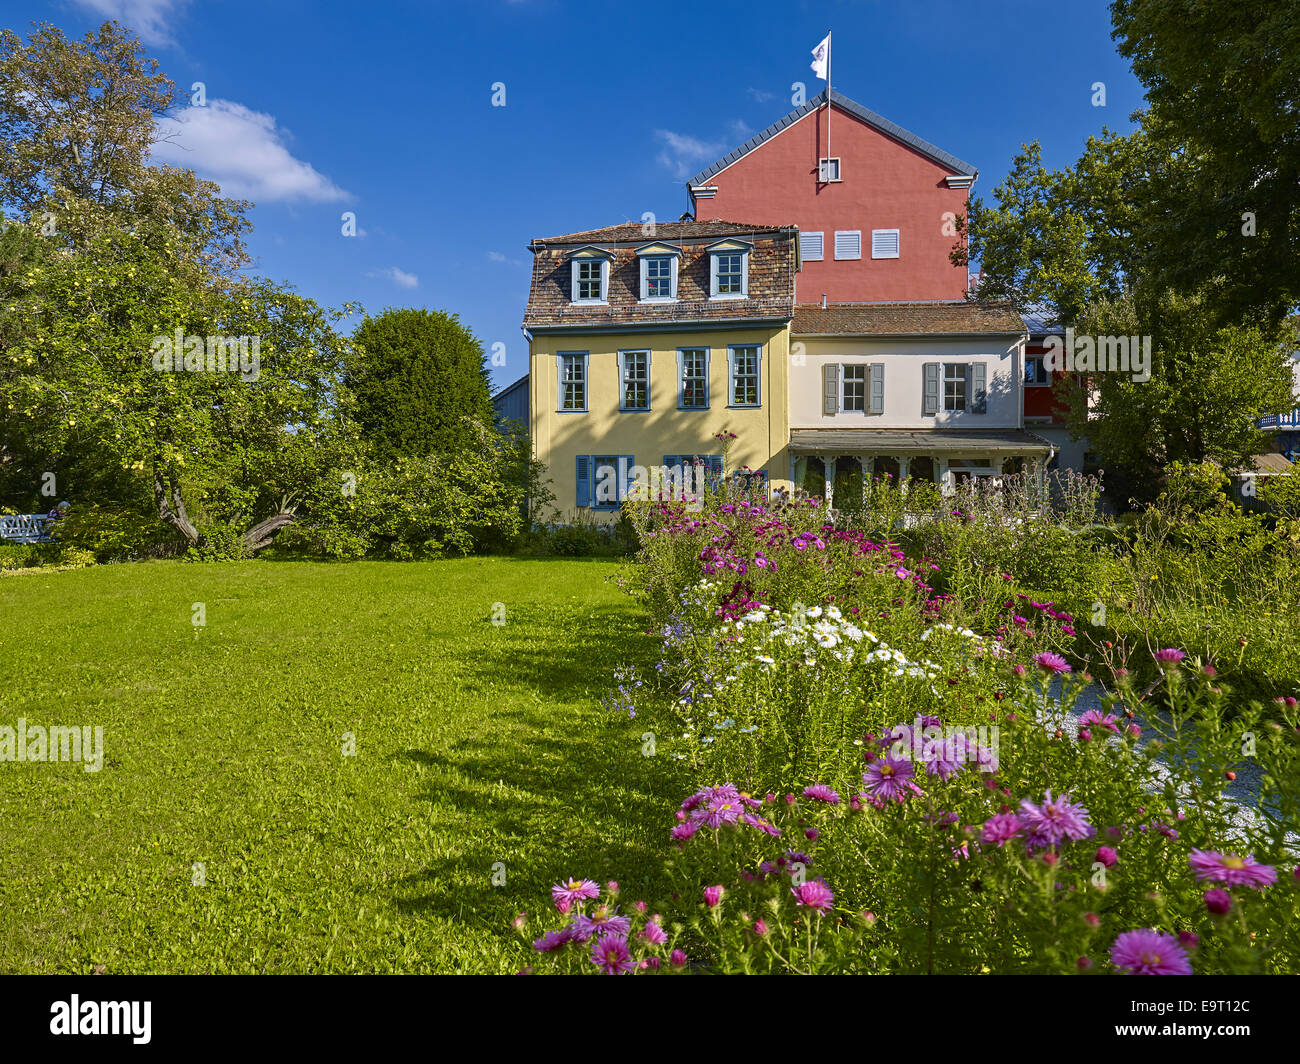 Schiller house in Jena, Thuringia, Germany Stock Photo